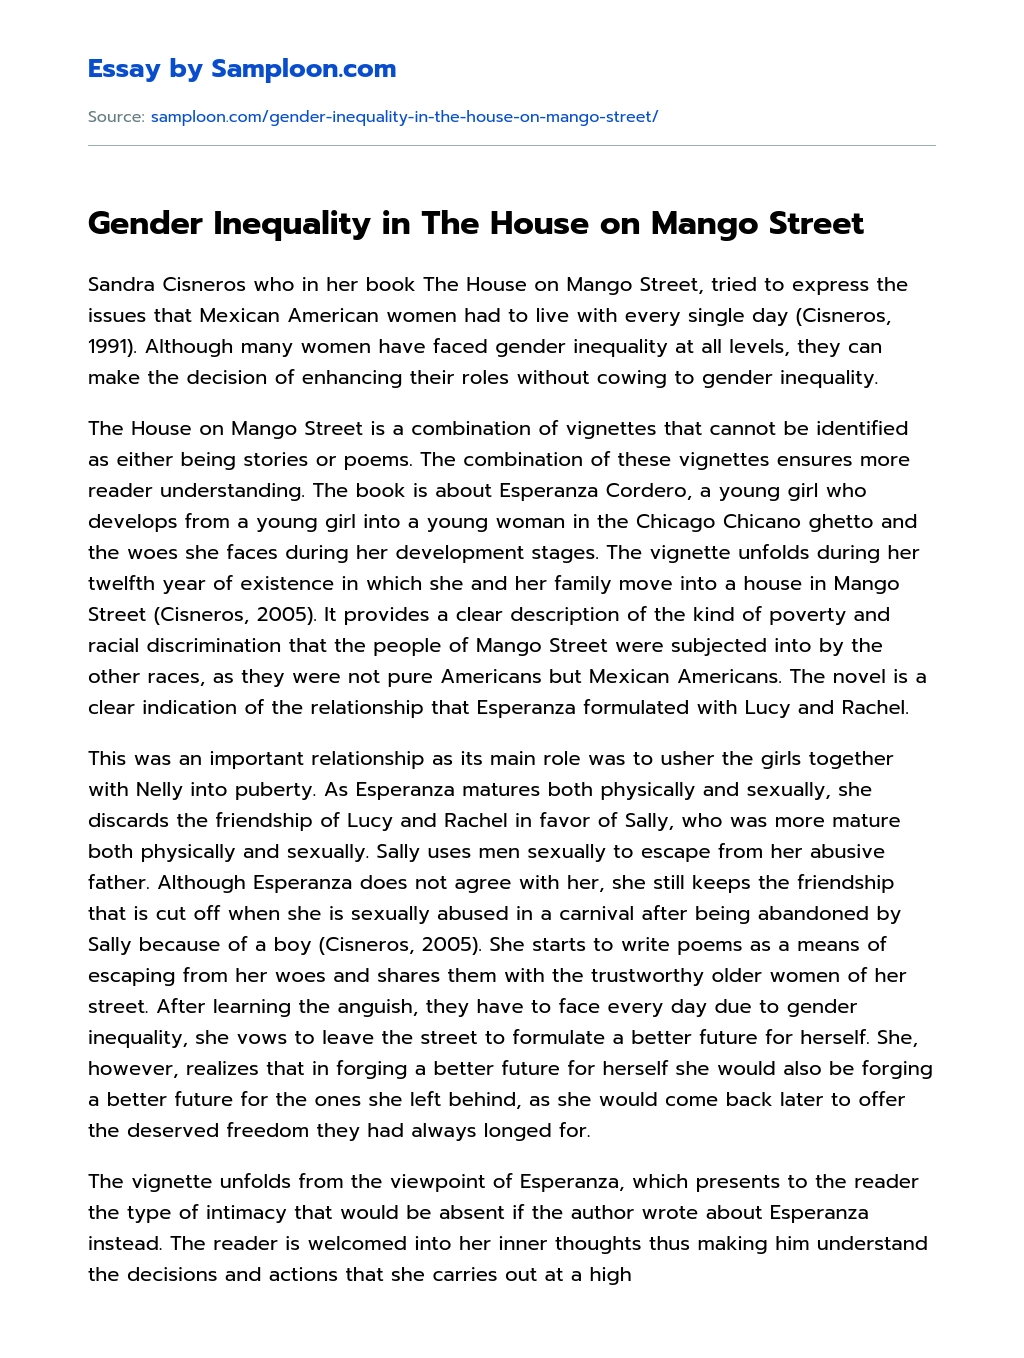 Gender Inequality in The House on Mango Street Analytical Essay essay